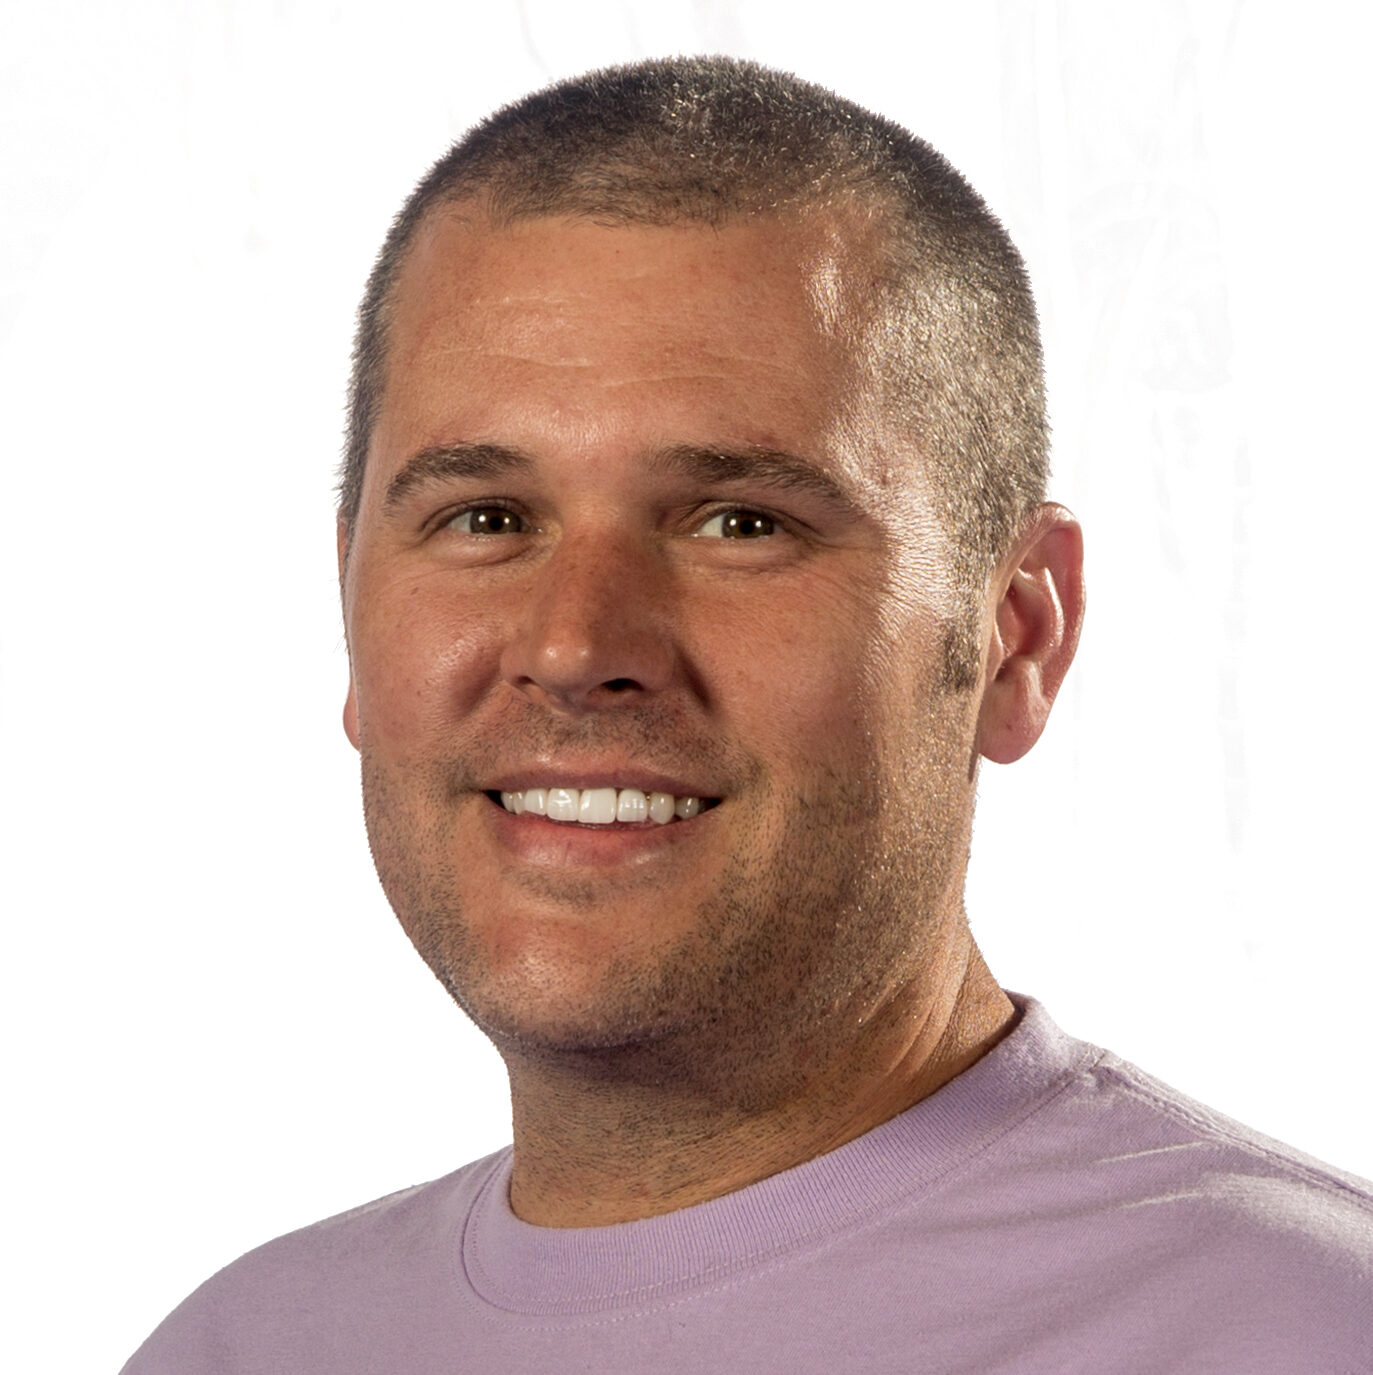 headshot of smiling man in t-shirt with closely cropped hair